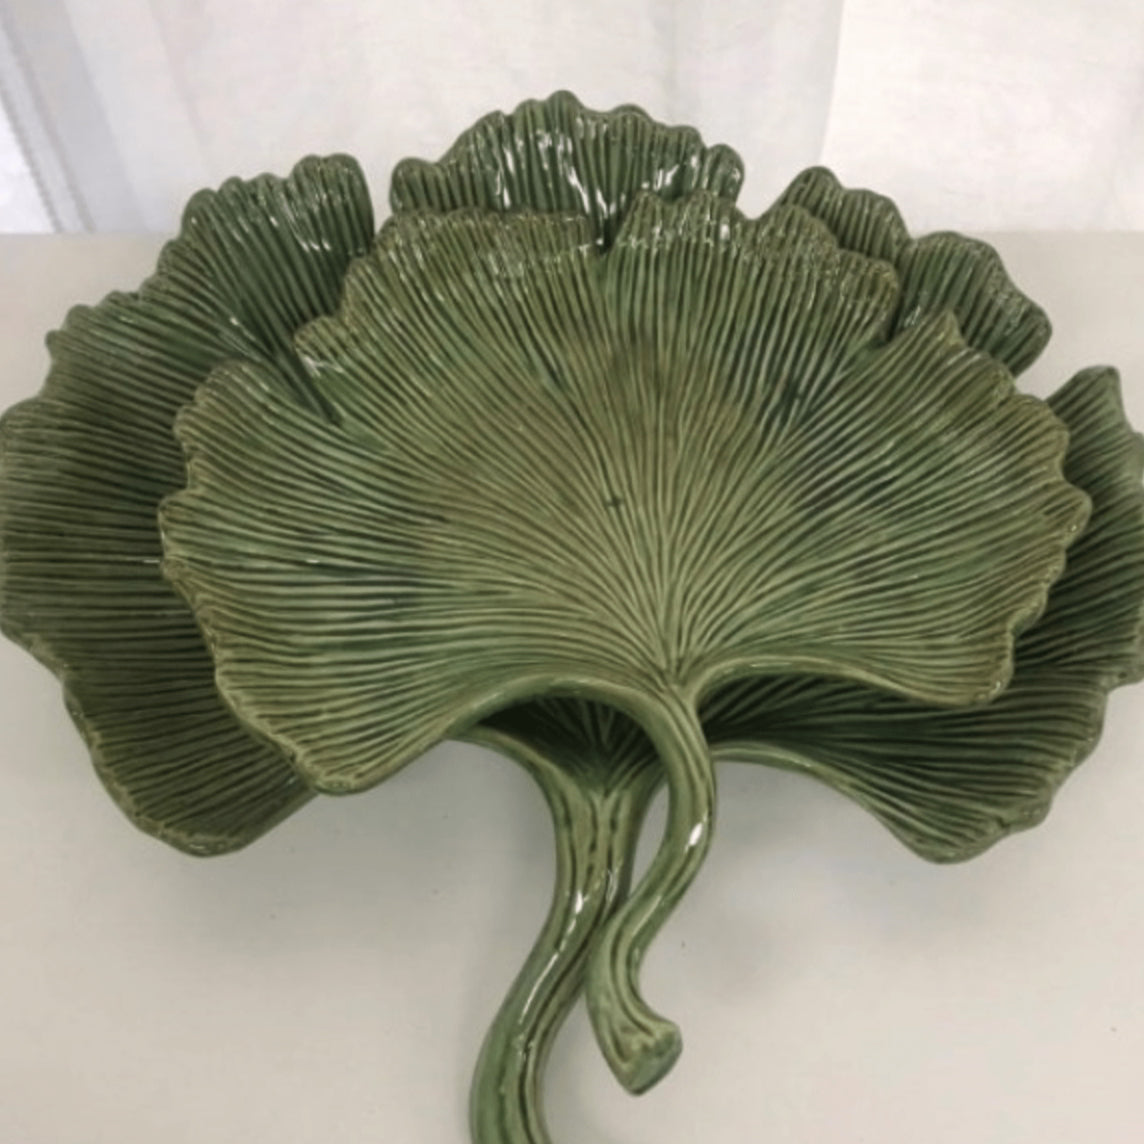 Three green Mediterranean Markets Ginkgo Leaf Plate - Large leaves on a white surface.